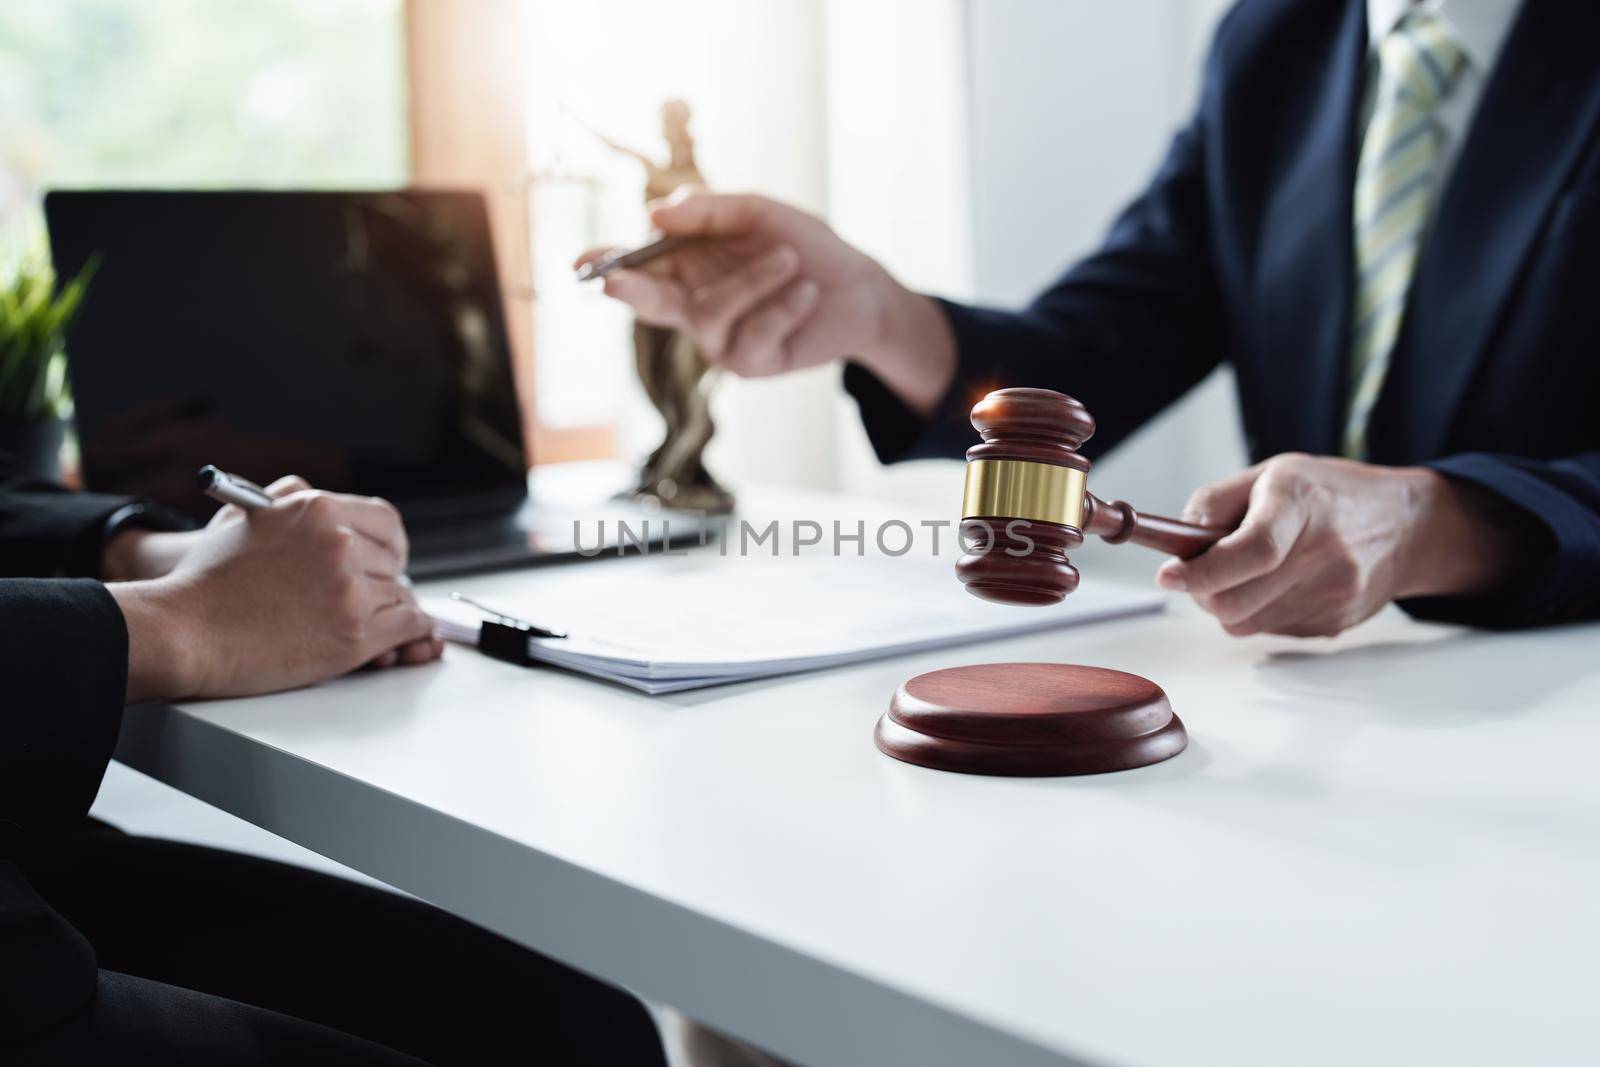 Focus at gavel, Attorney or Lawyer holding a pen is consulting with a client to explain the pattern of answering questions before going to court to decide a lawsuit